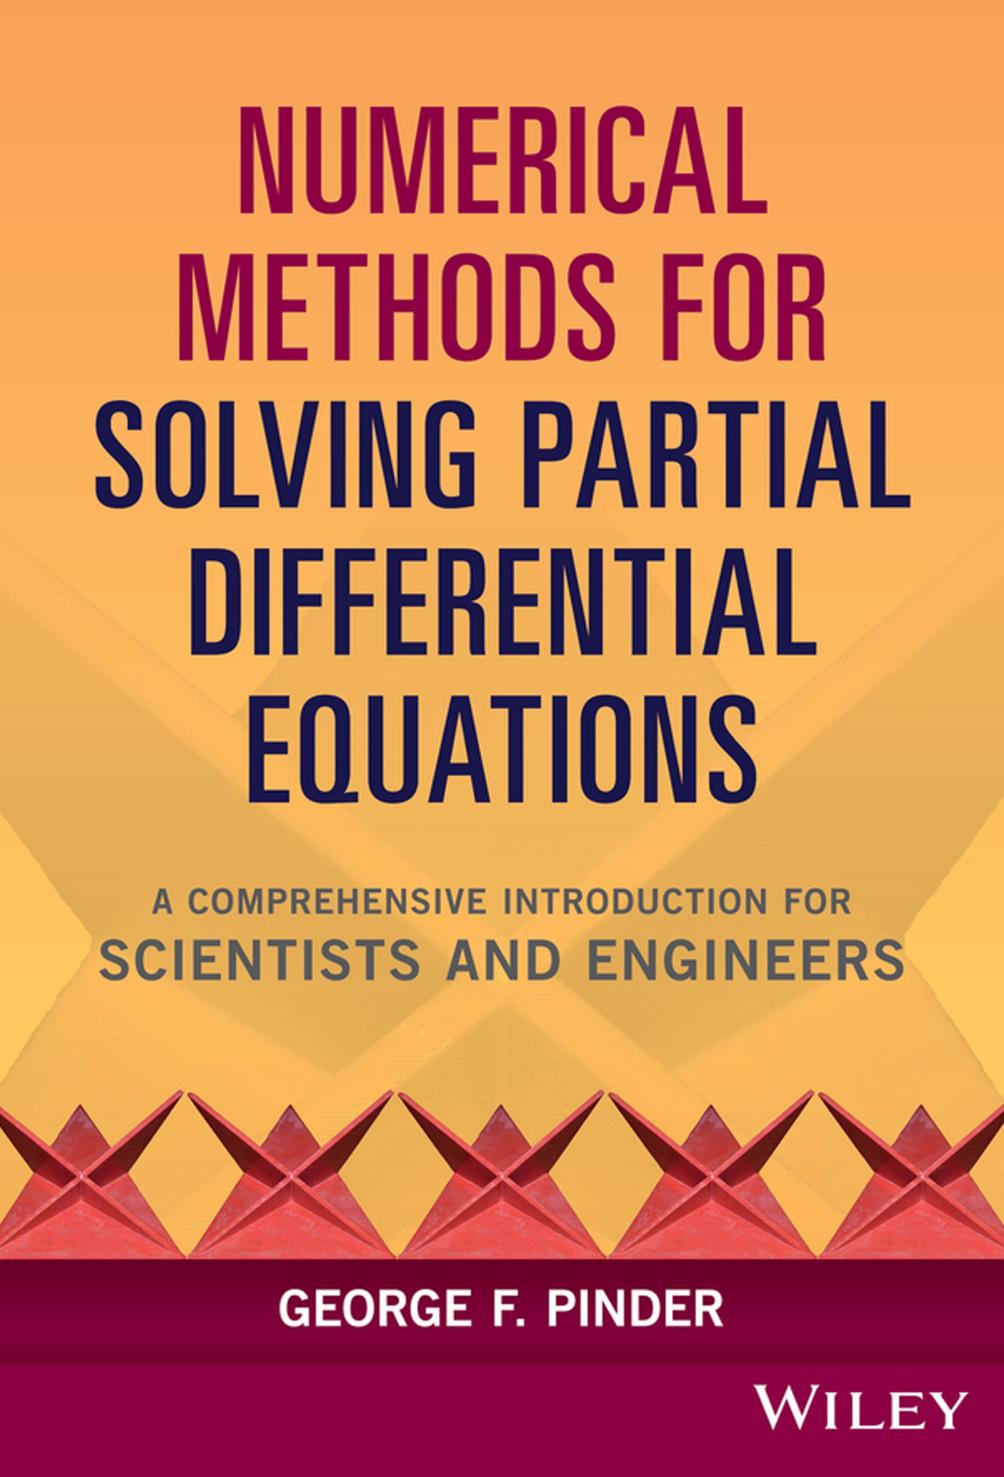 Numerical Methods for Solving Partial Differential Equations A Comprehensive Introduction for Scientists and Engineers 2018